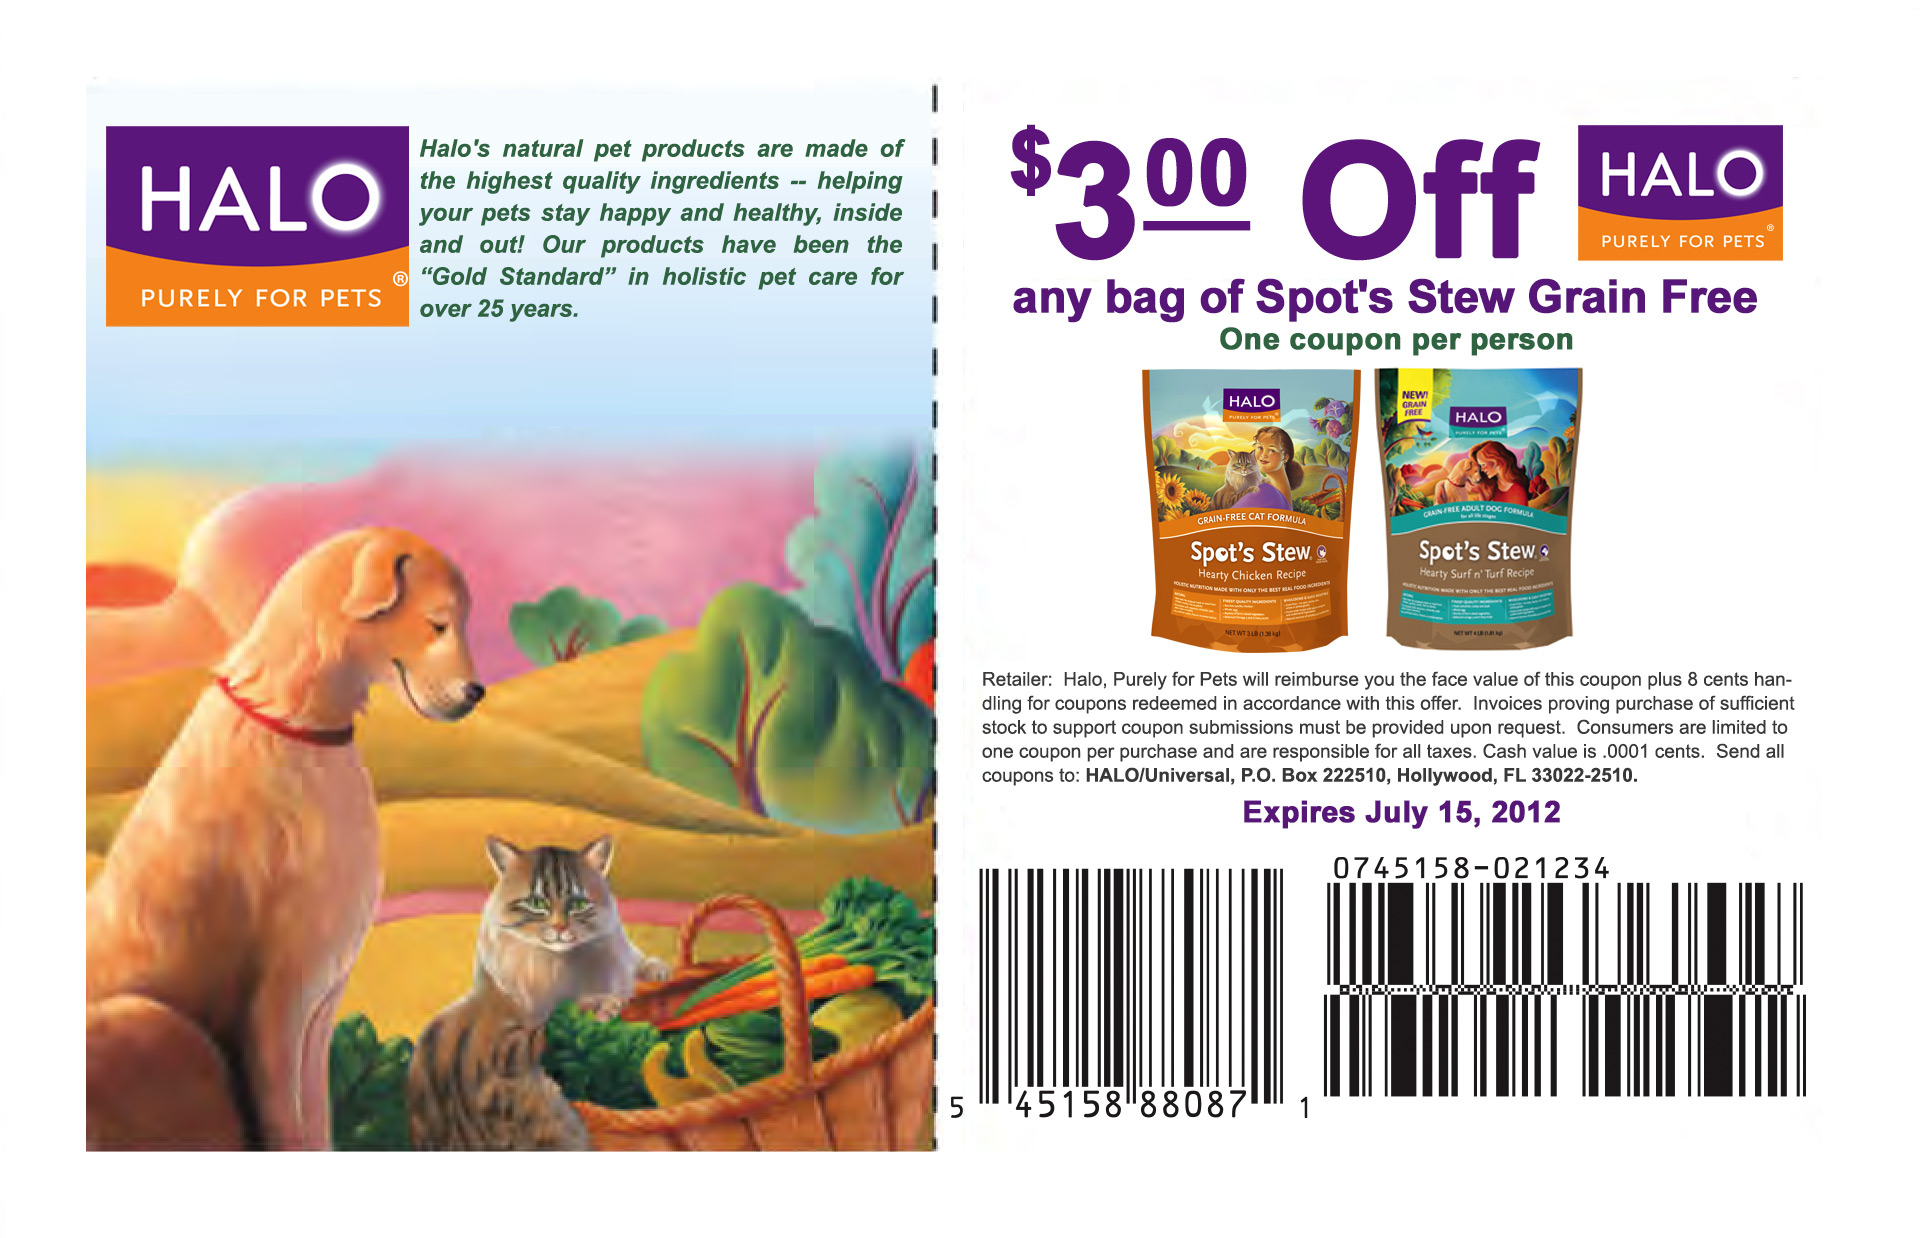 Halo Cat Food Coupons And Reviews | Cat Food Coupons - Free Printable Dog Food Coupons